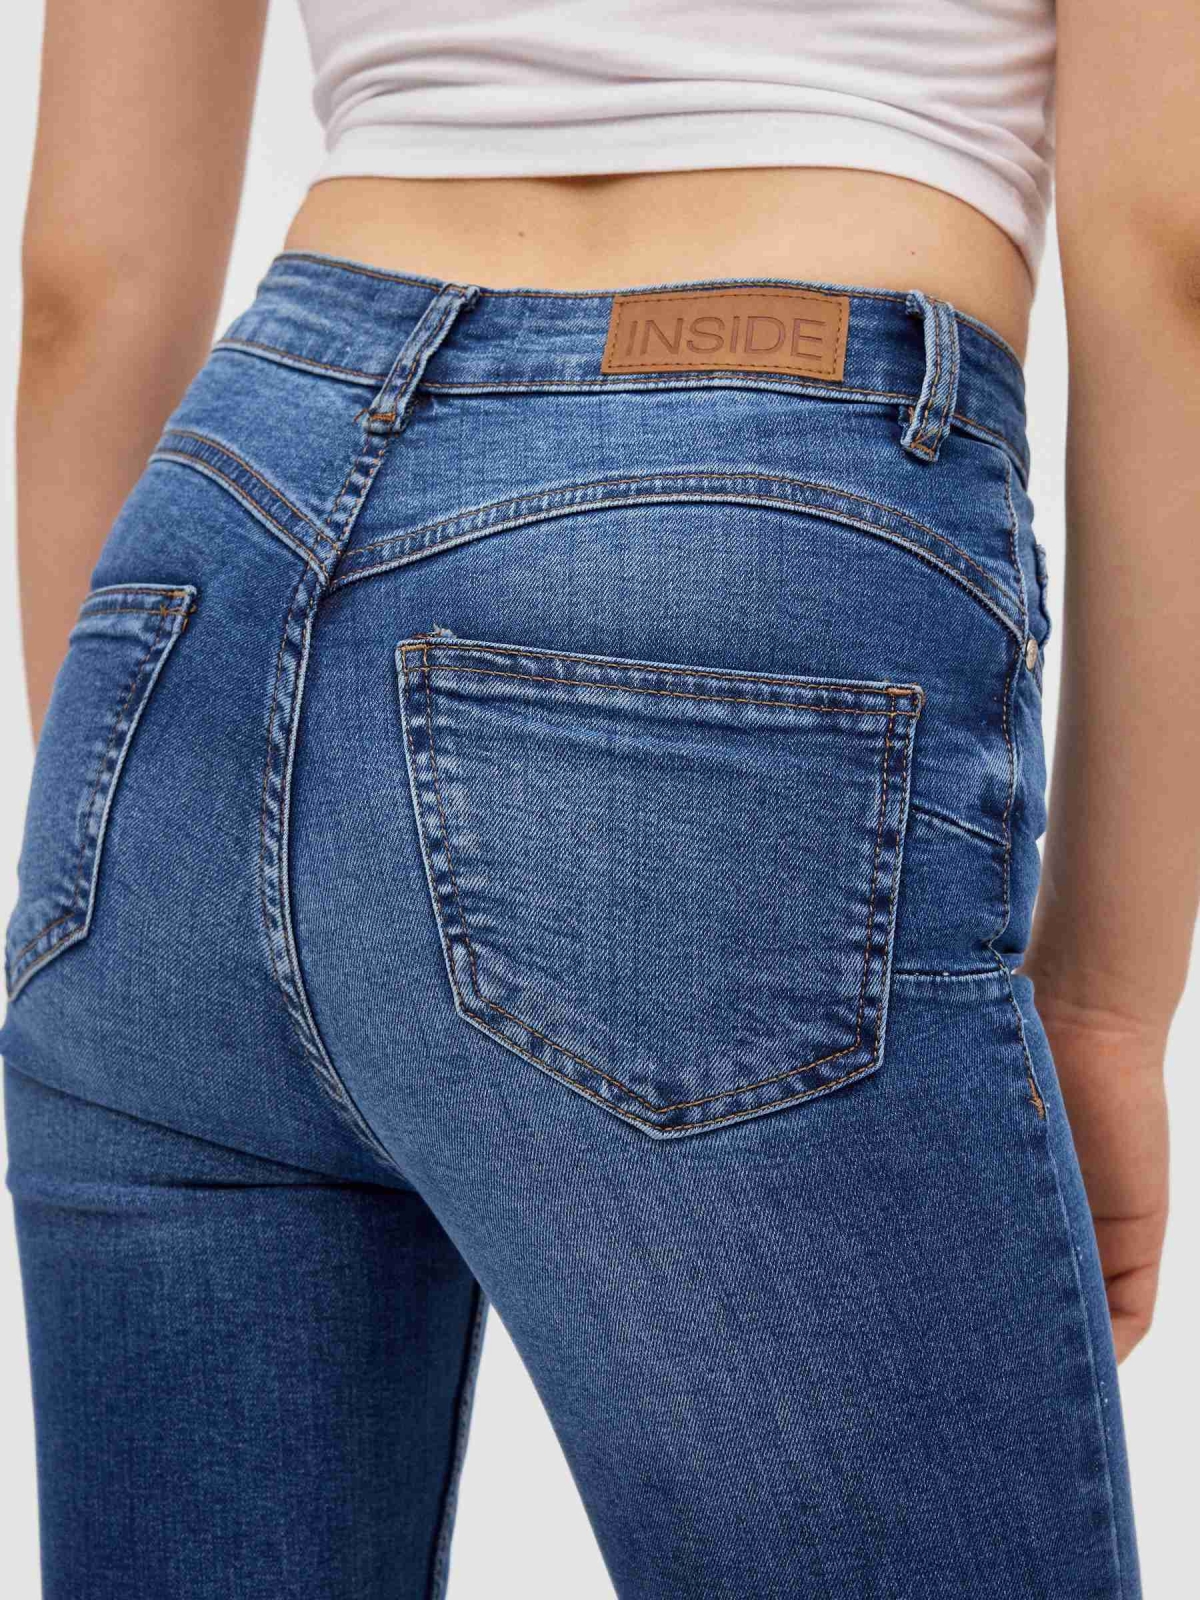 Skinny jeans push up high rise blue detail view